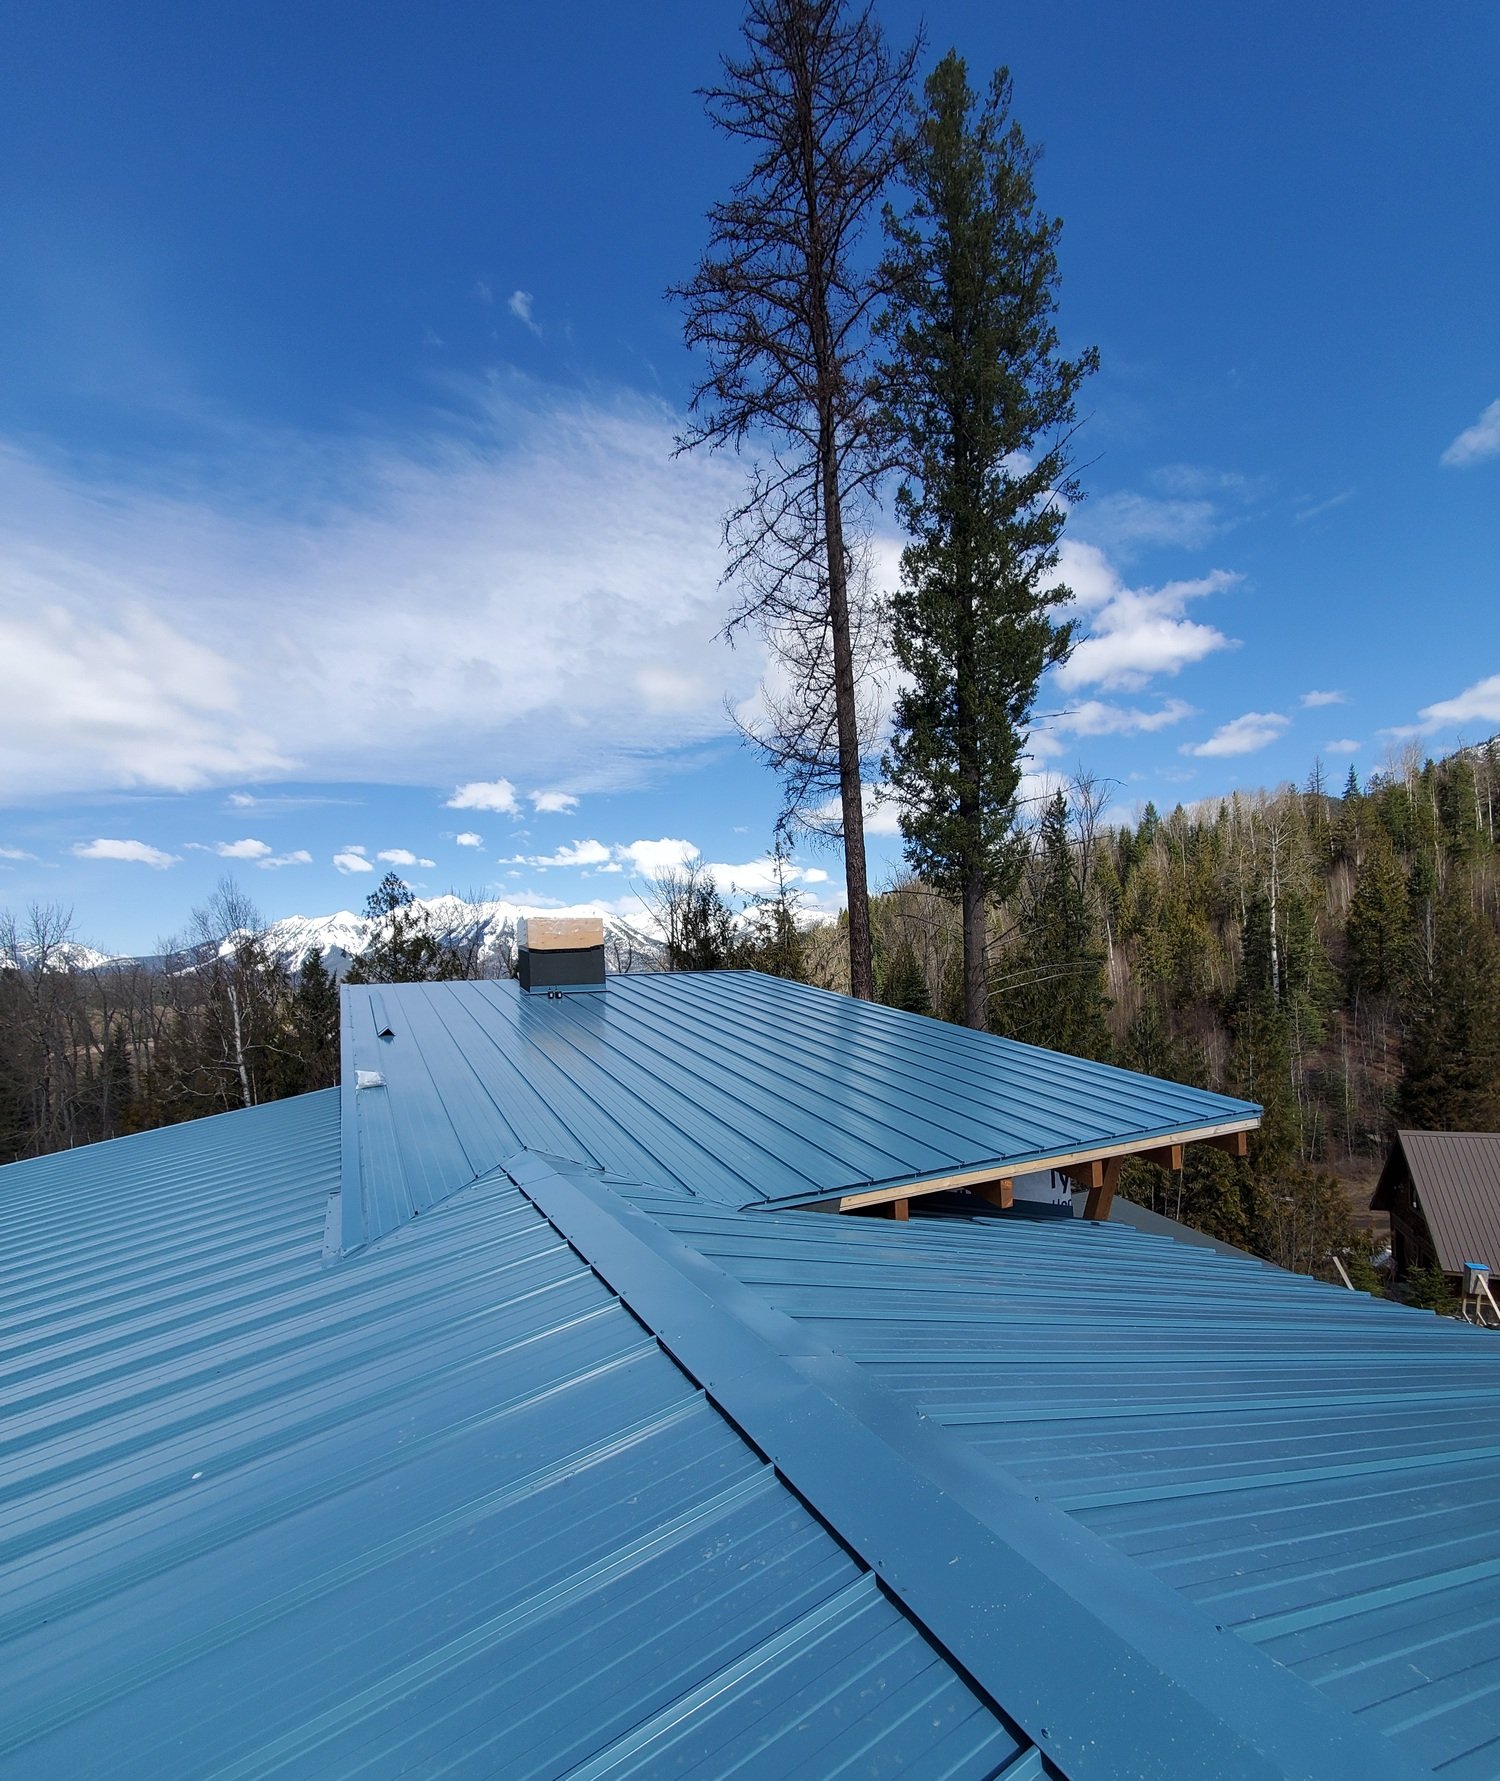 Birdhouse Roofing New Construction Standing Seam Metal Roof